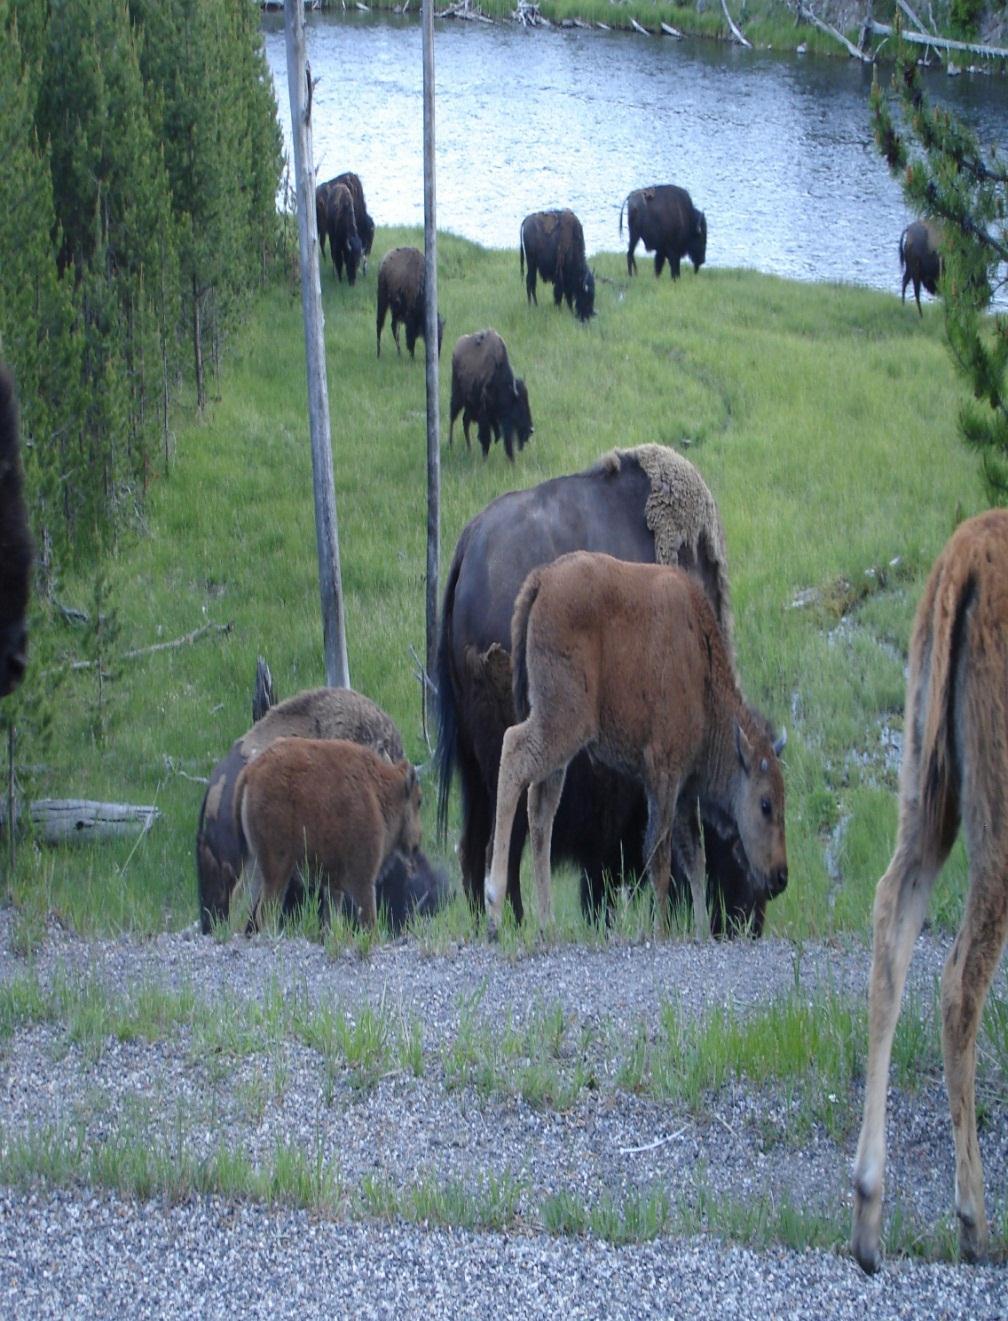 Current Yellowstone Buffalo Management Plan designates the Montana Department of Livestock as the agency in charge of buffalo management operations outside the park. The National Park Service, the U.